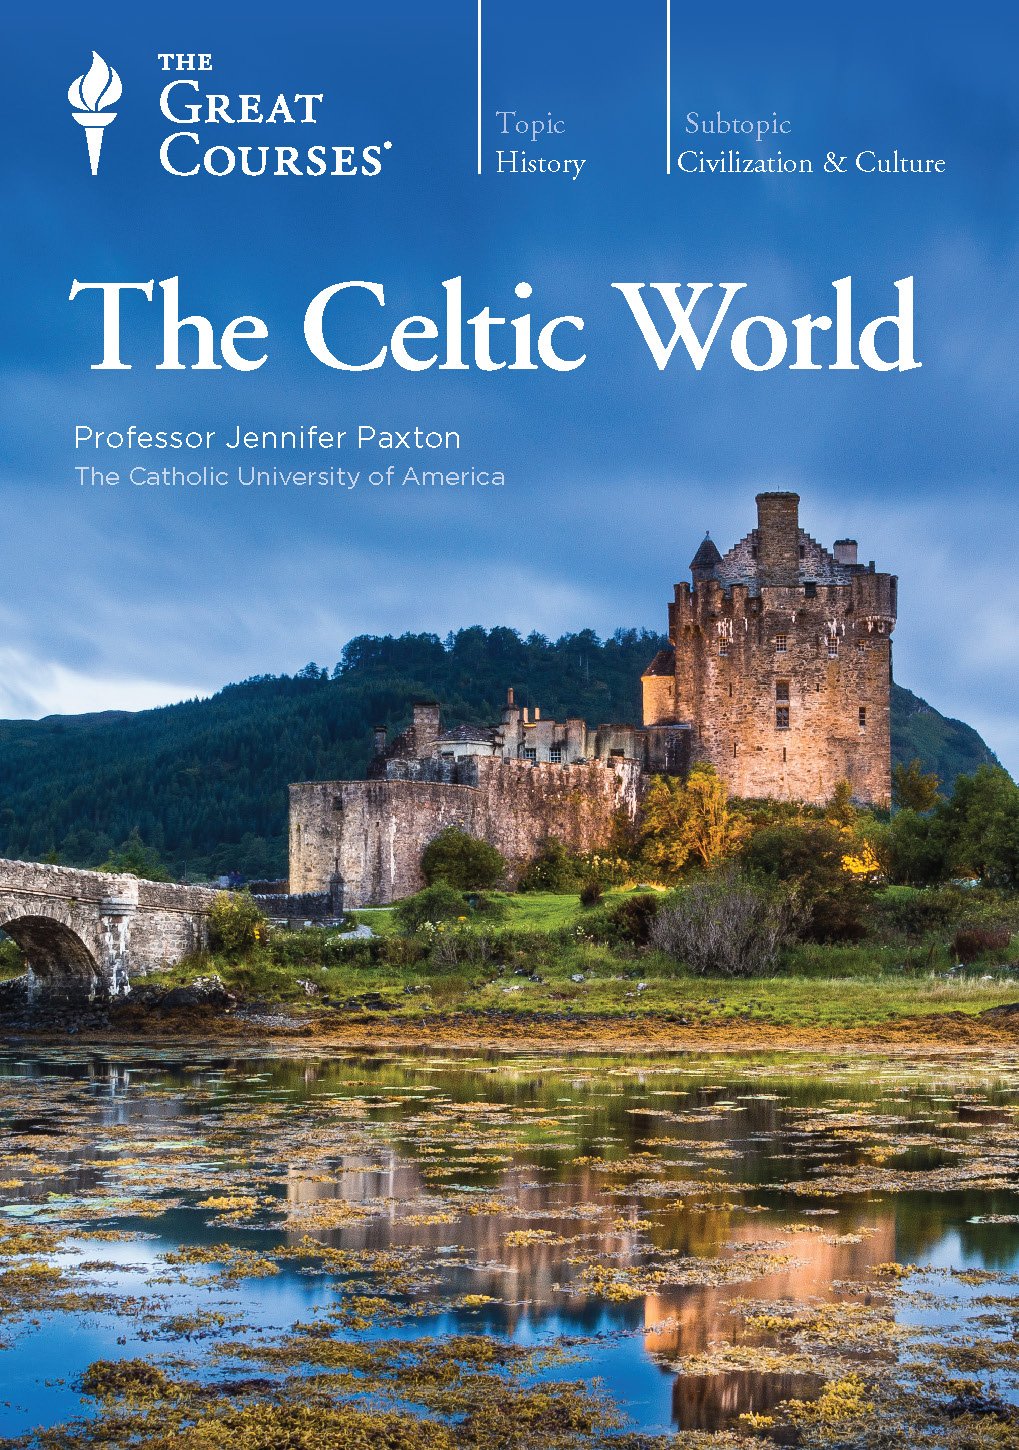 Image for "The Celtic World"